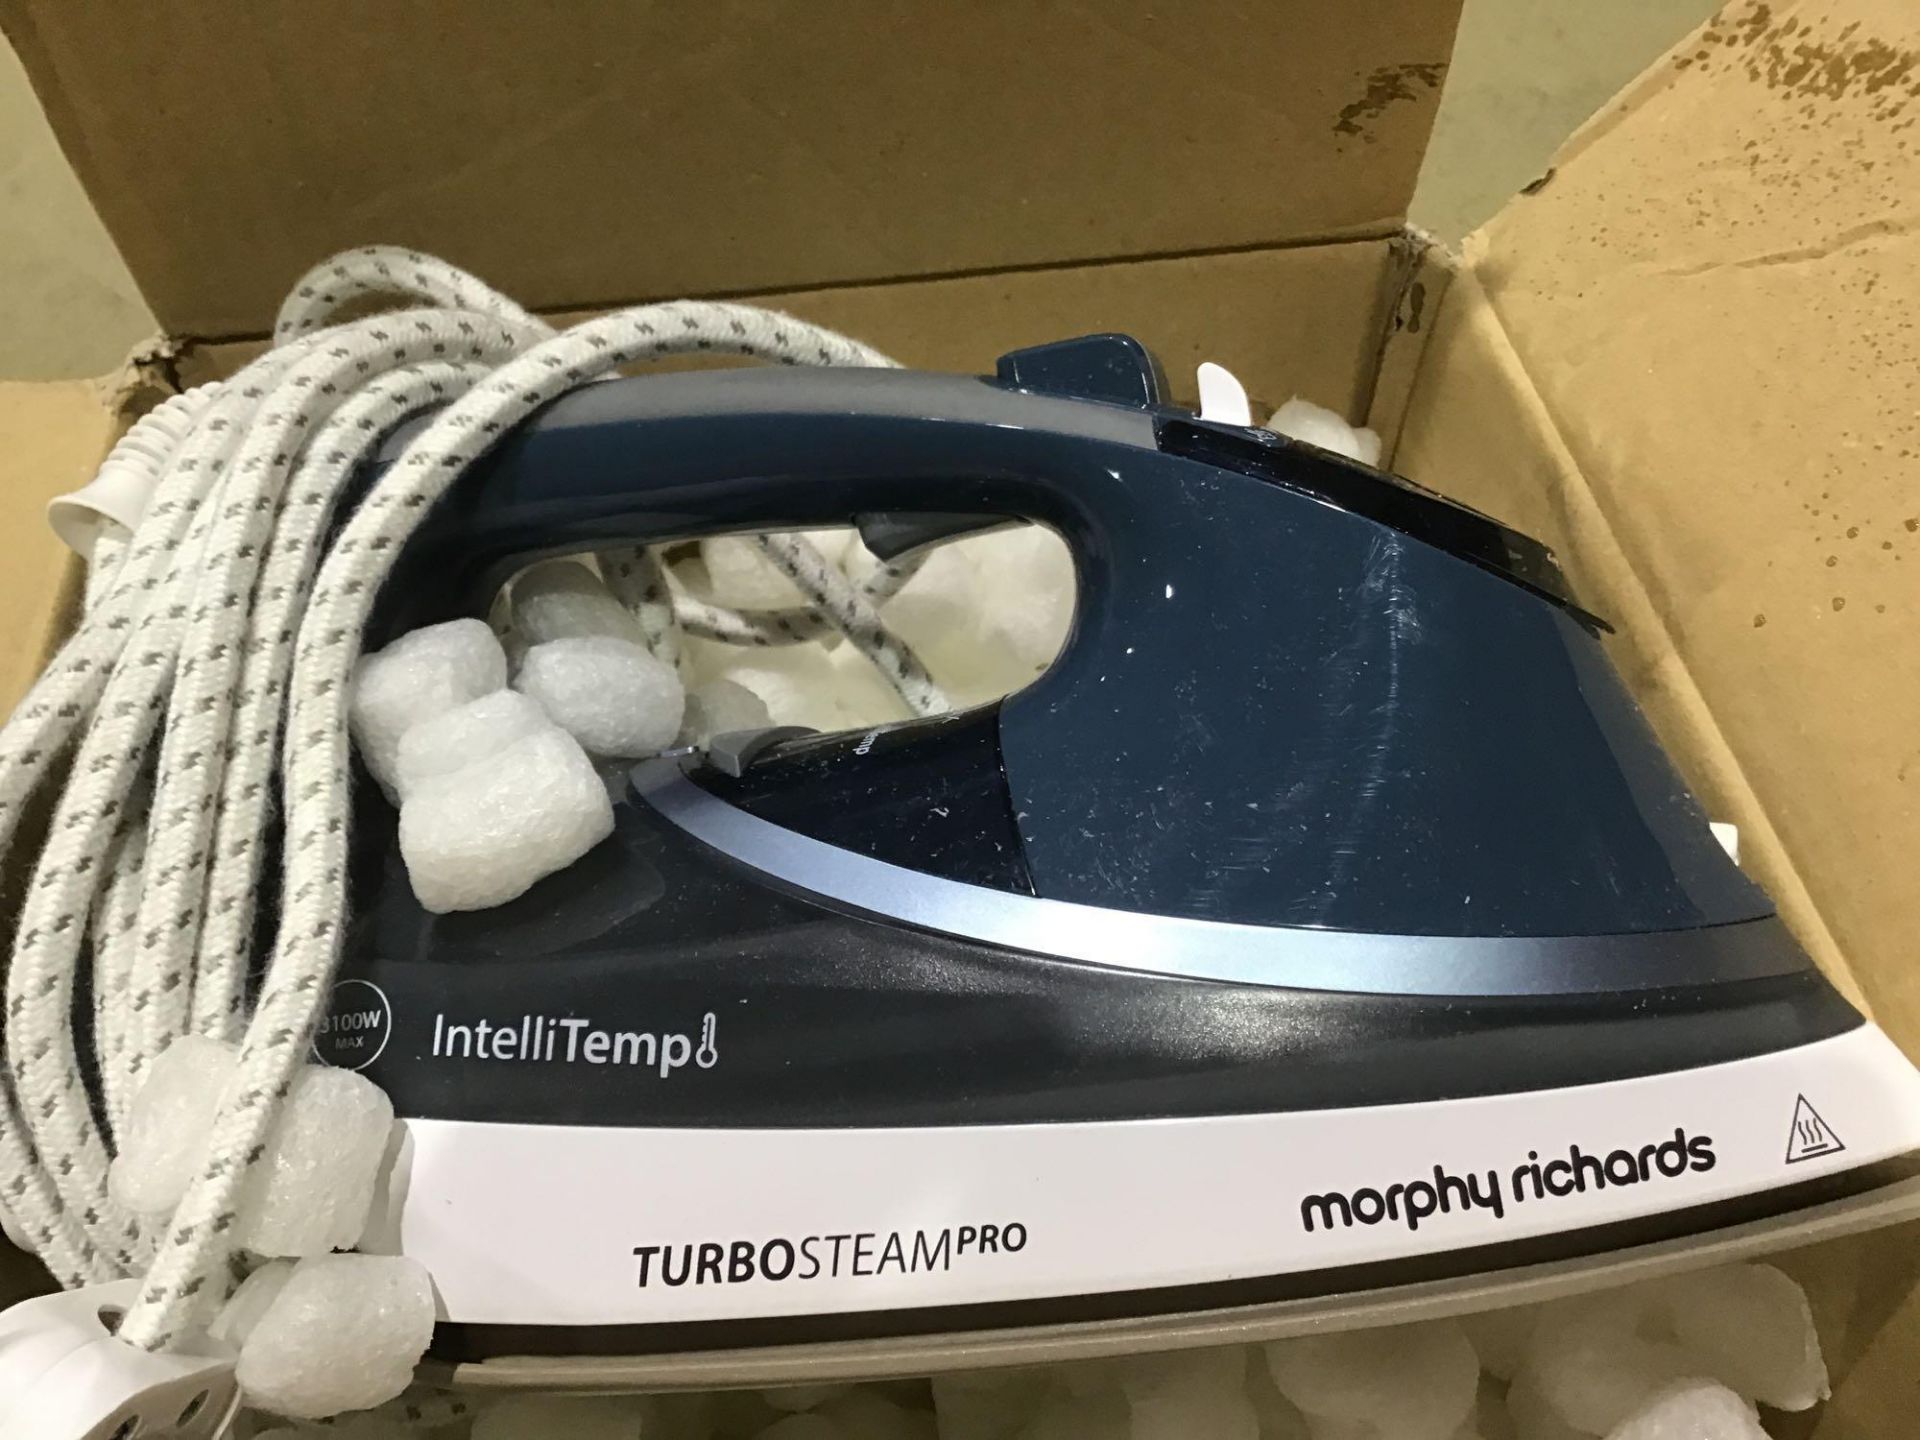 Morphy Richards Steam Iron 303131 Turbosteam Pro with Intellitemp Steam Iron, Blue £37.99 RRP - Image 2 of 4